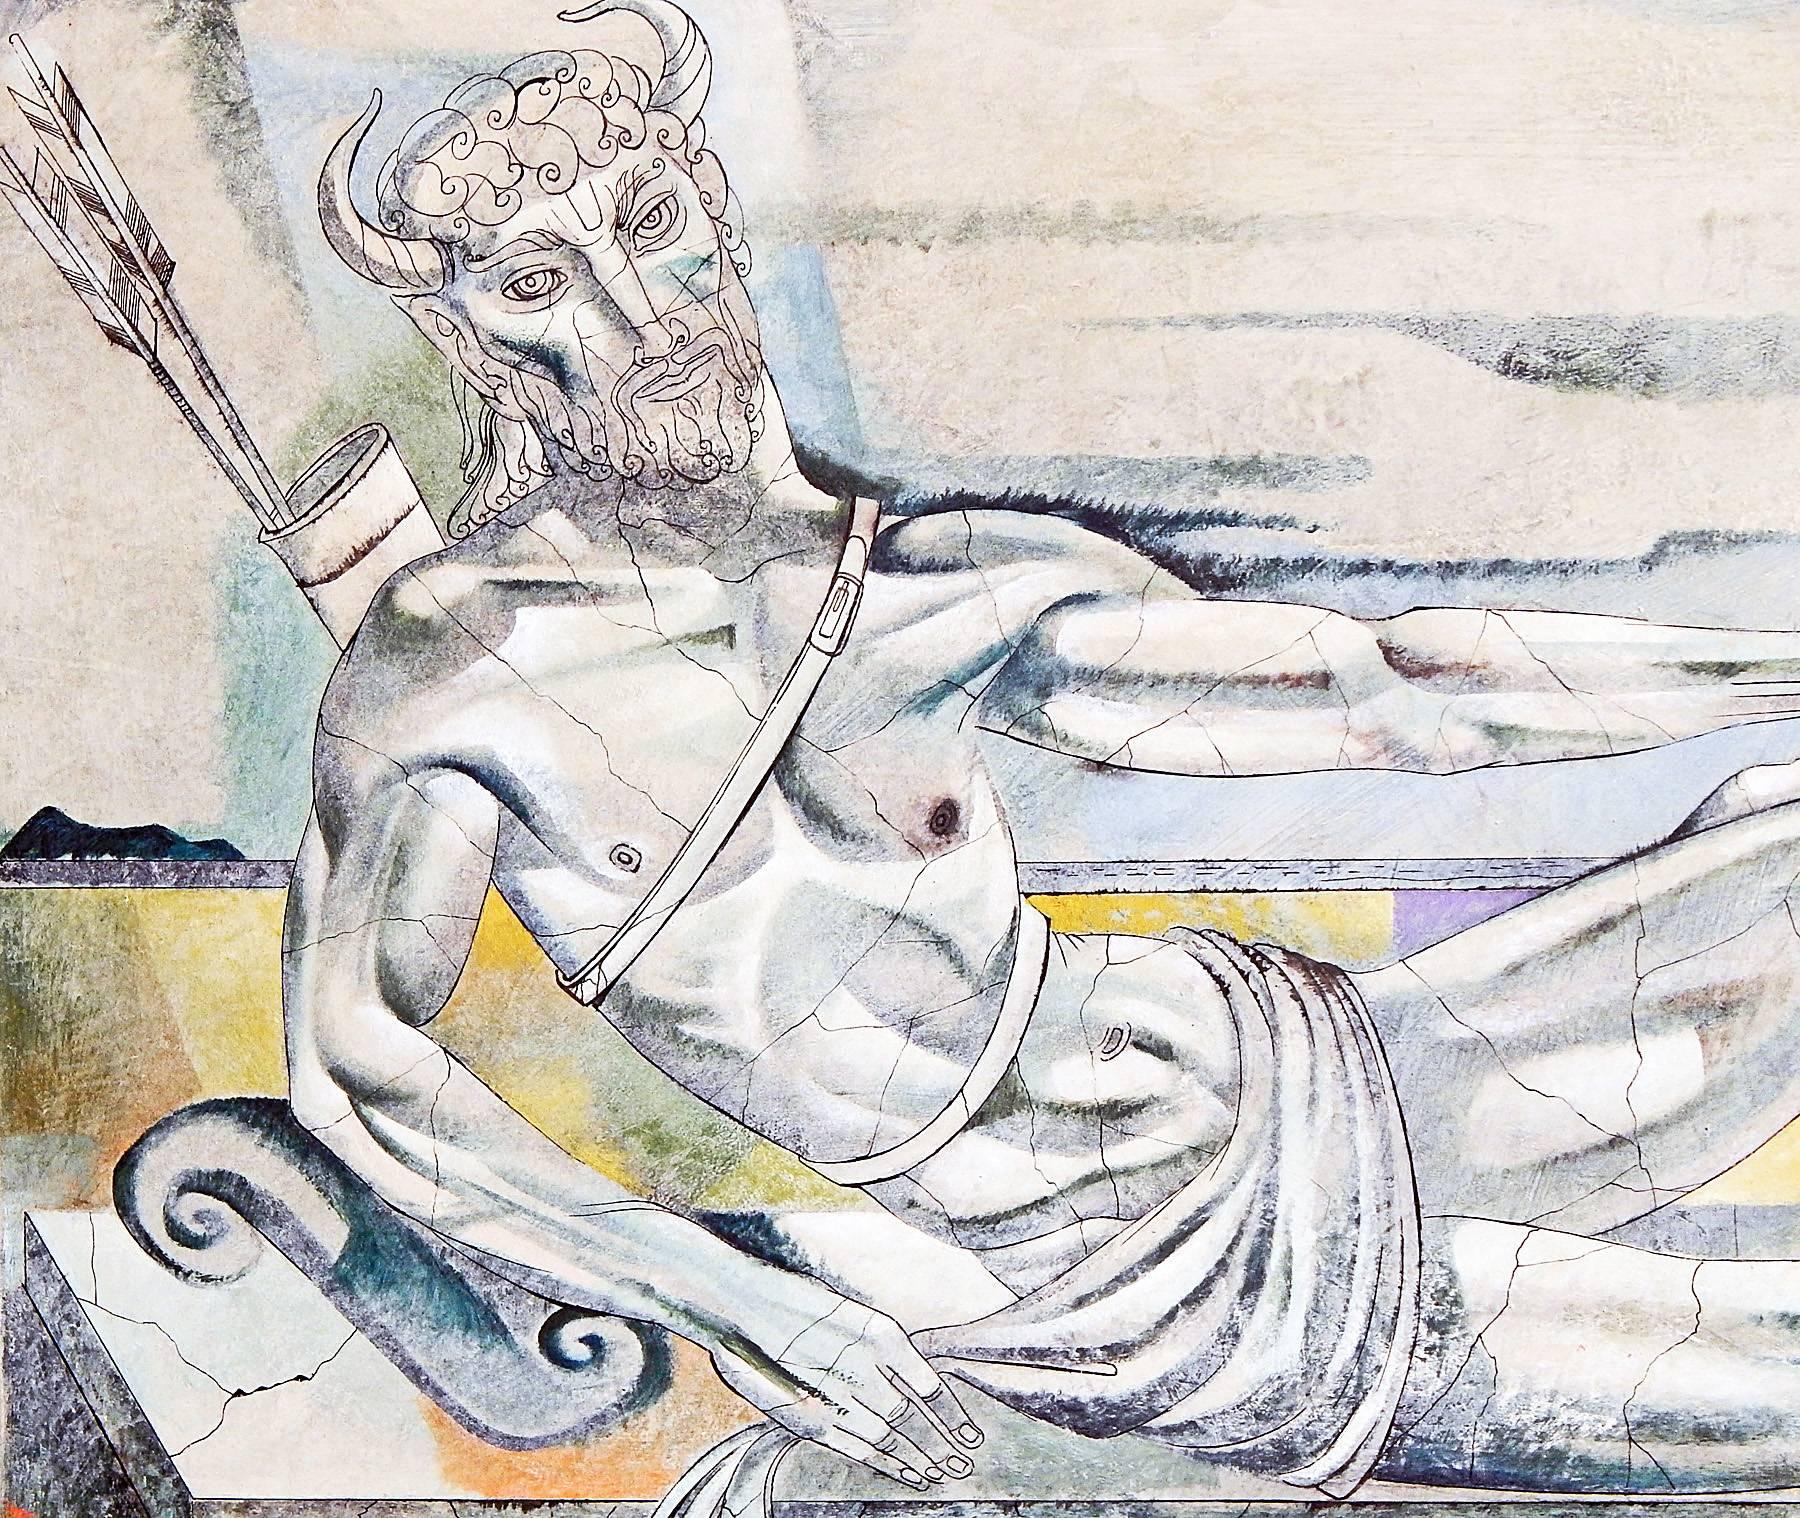 Large and arresting, this stylized depiction of the great hunter in Greek mythology, Actaeon, resting on a slab of marble with his bow and quiver of arrows, was painted by Leon Dusso, a major figure in 1940s Hollywood. Actaeon, according to myth,